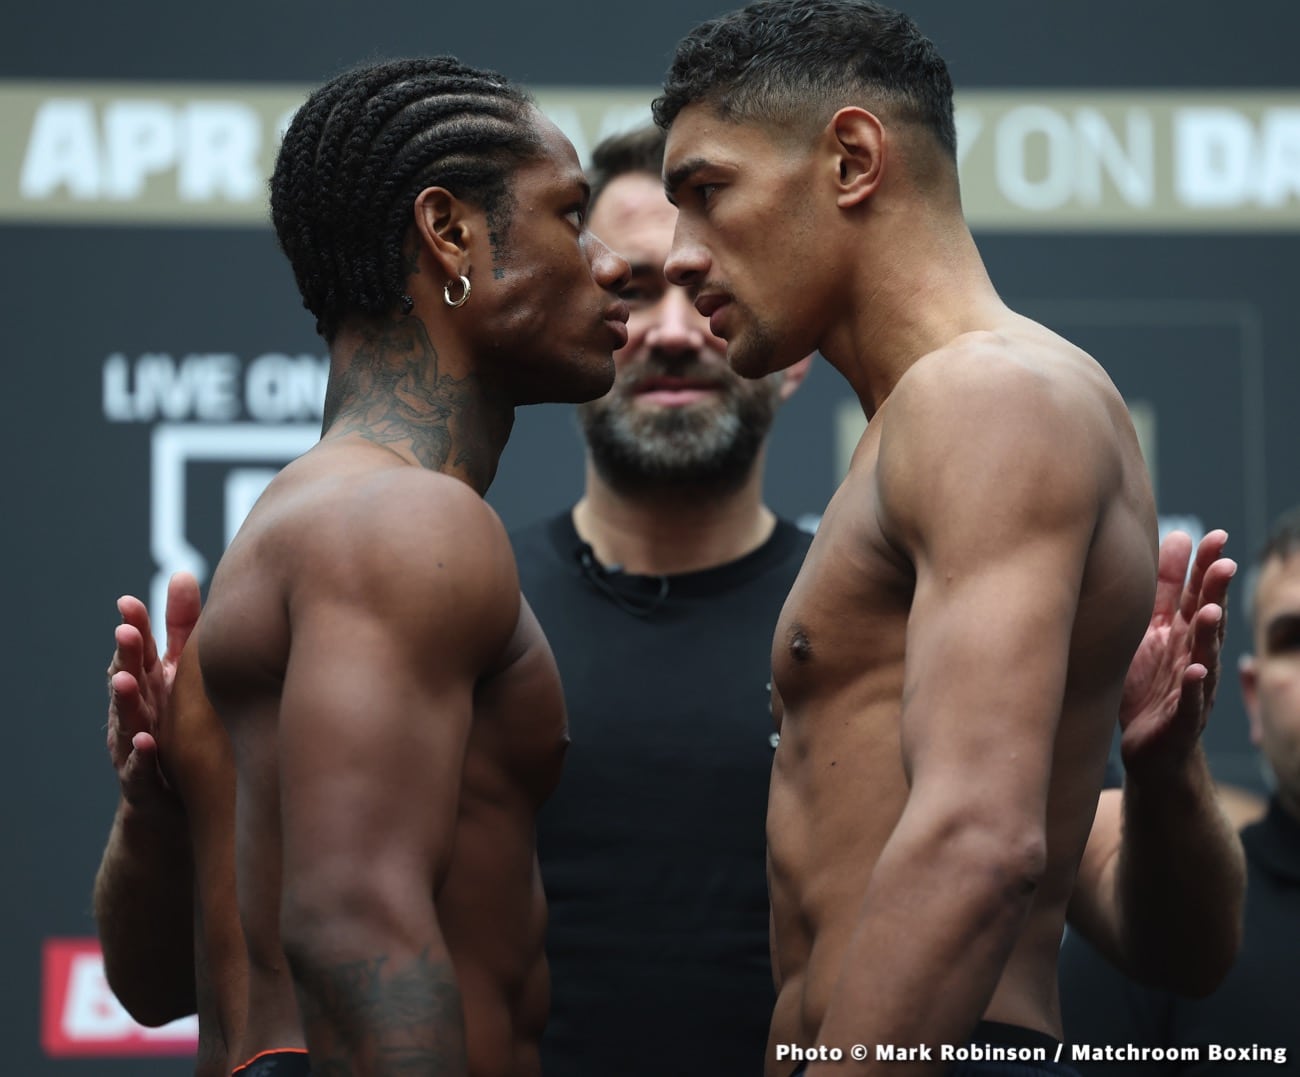 Joshua vs Franklin Official DAZN Weigh In Results